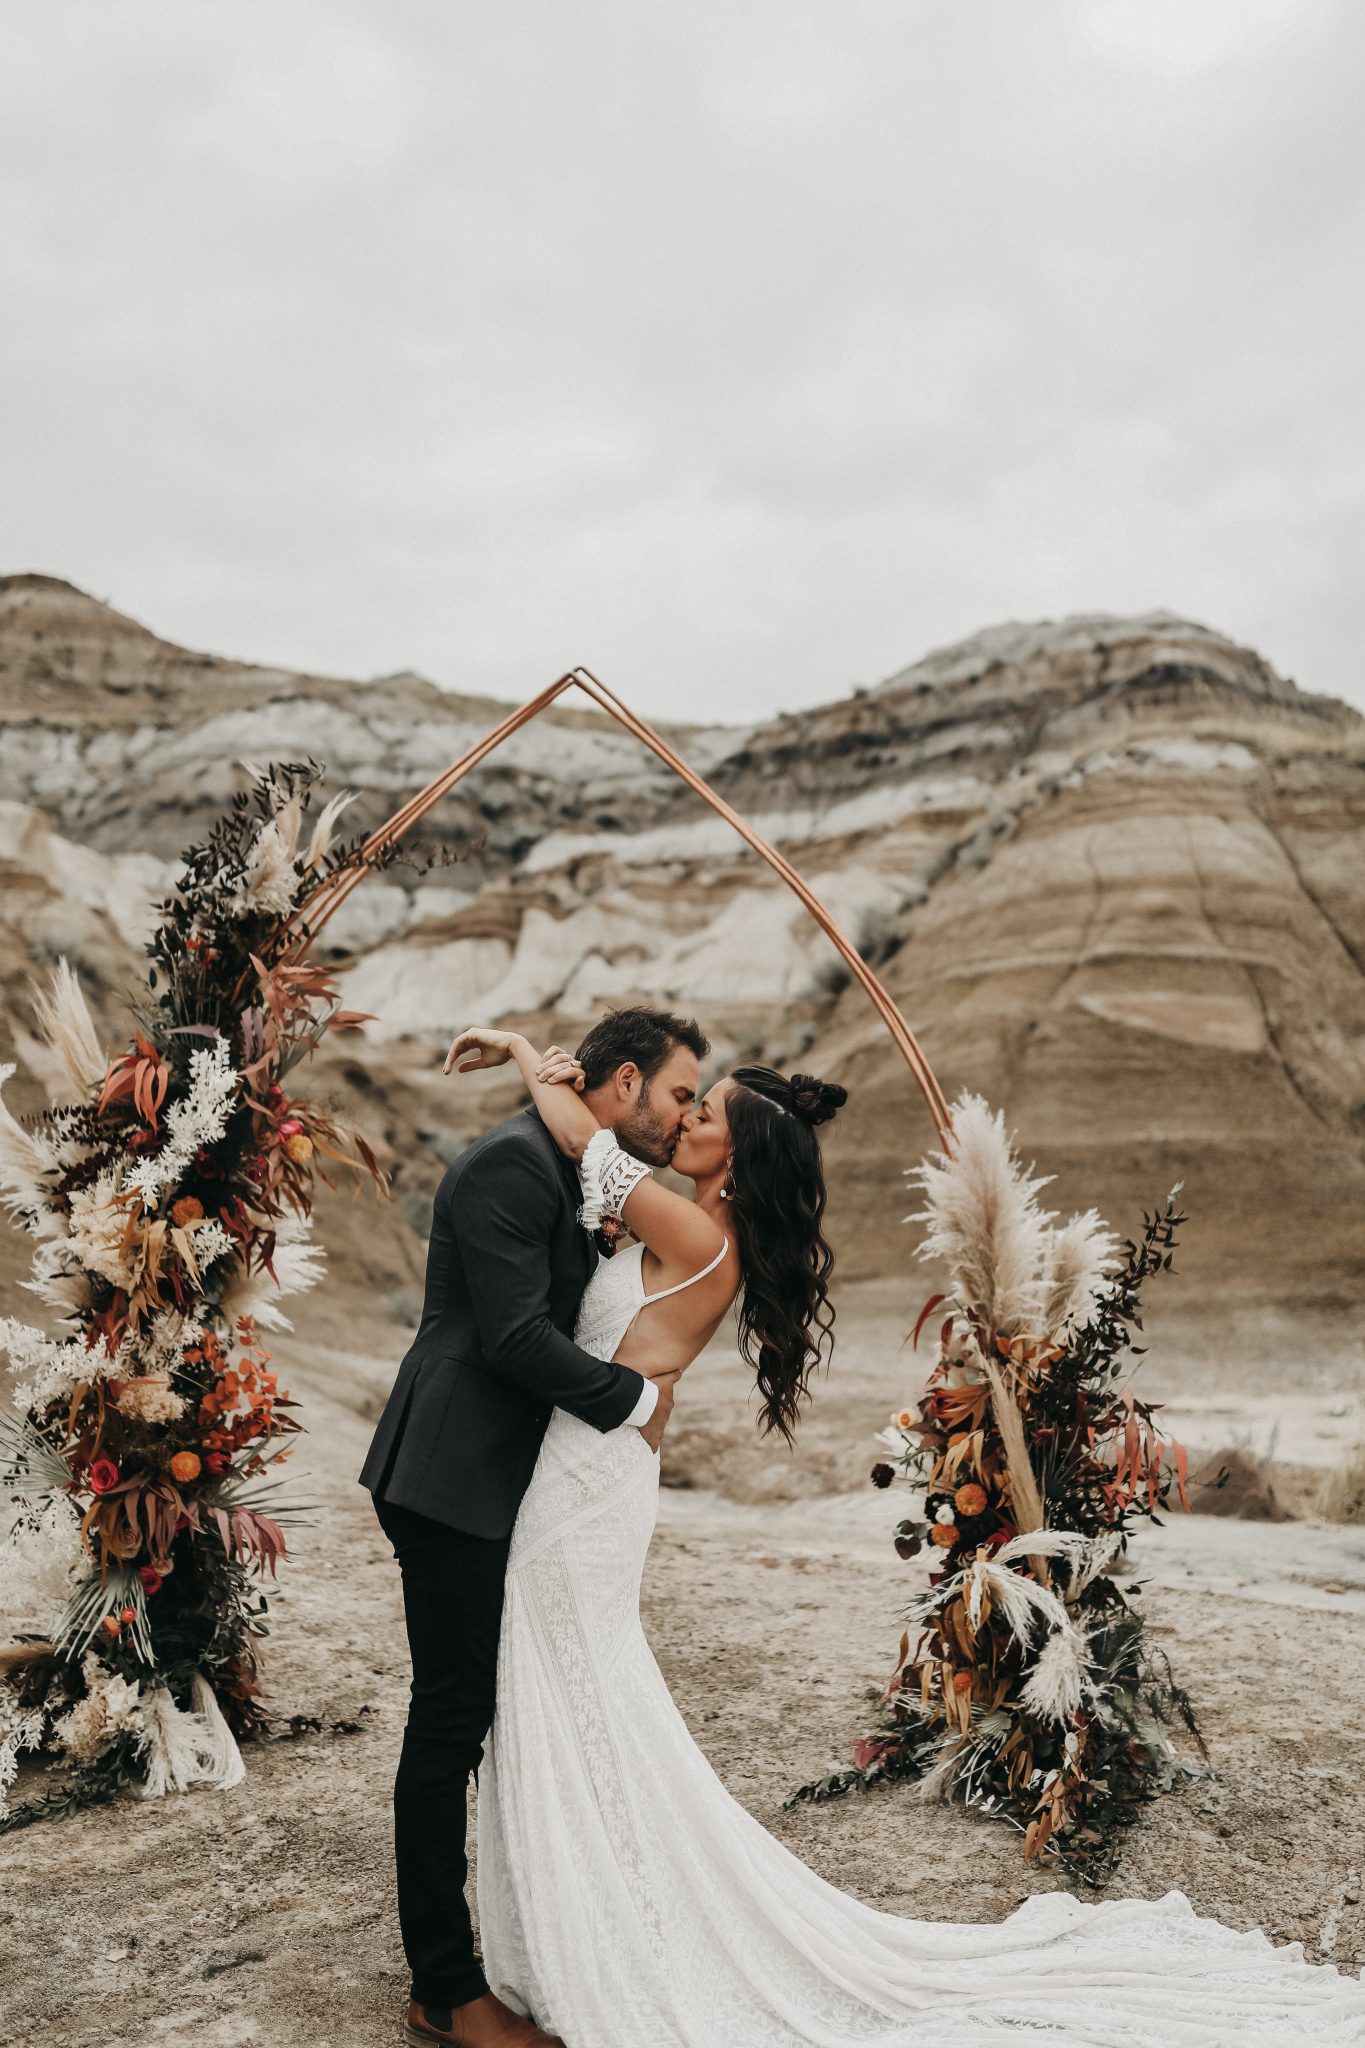 Moroccan Elopement Inspiration with dried boho florals, a copper arch and terracotta colour palette